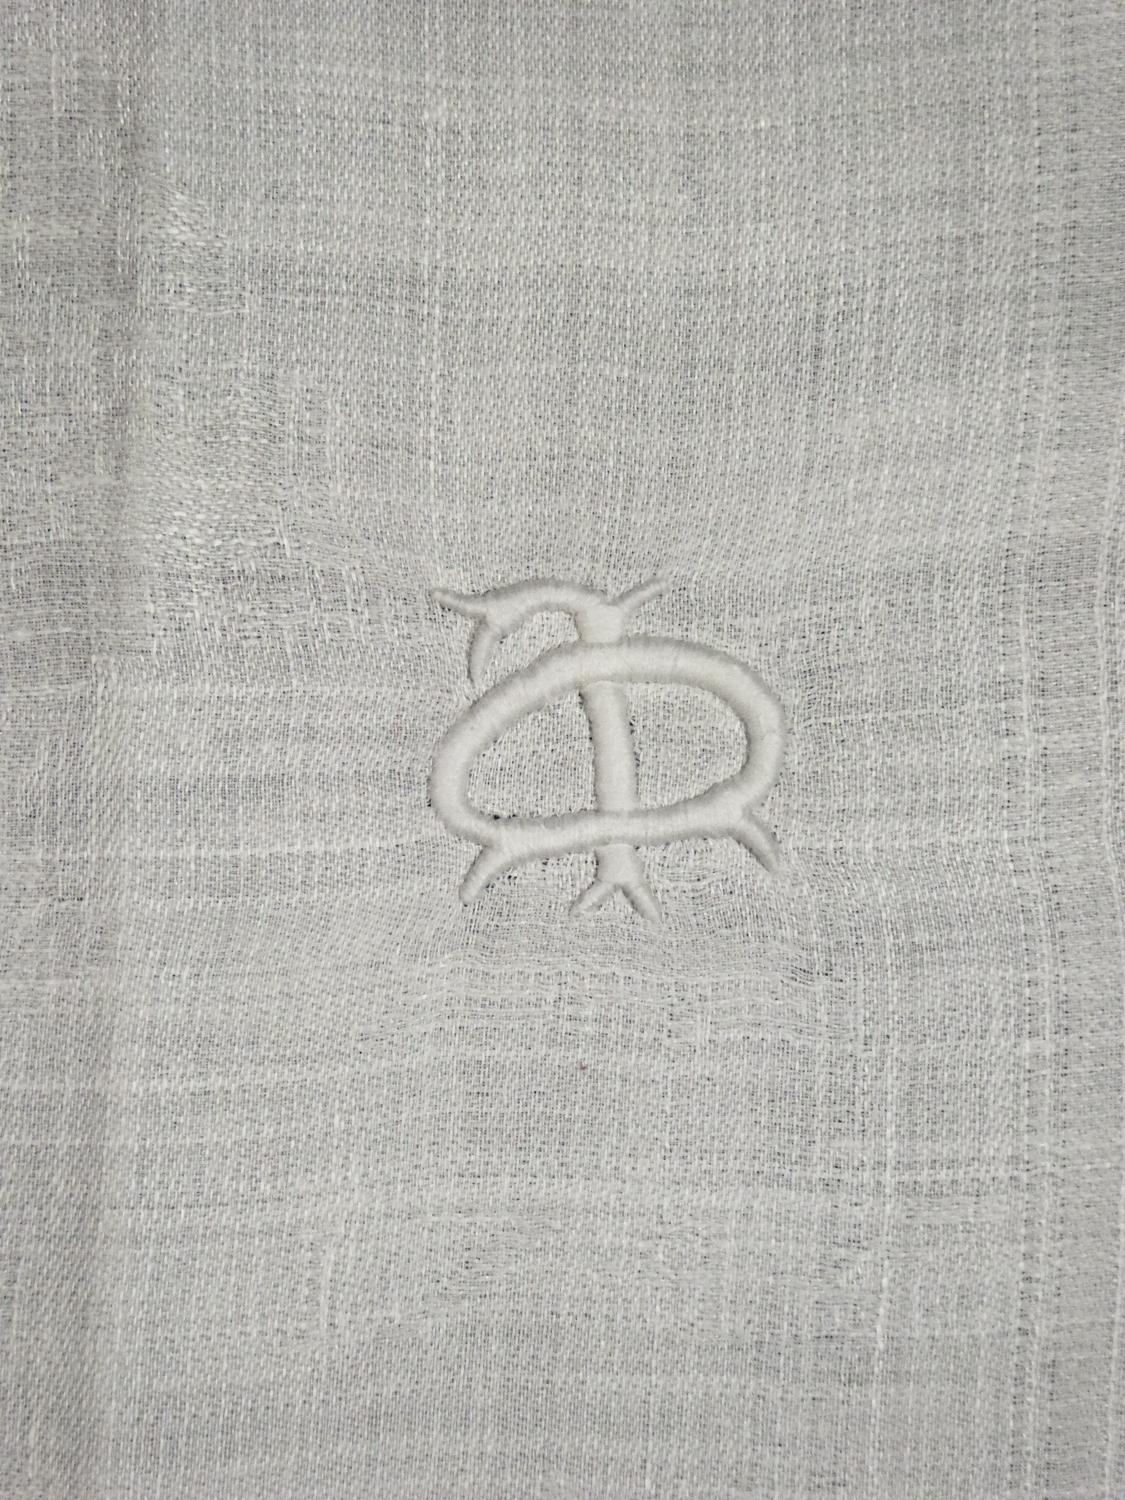 French 18th Linen Damask Tablecloth and Napkins - La Bataille de Fontenoy  2